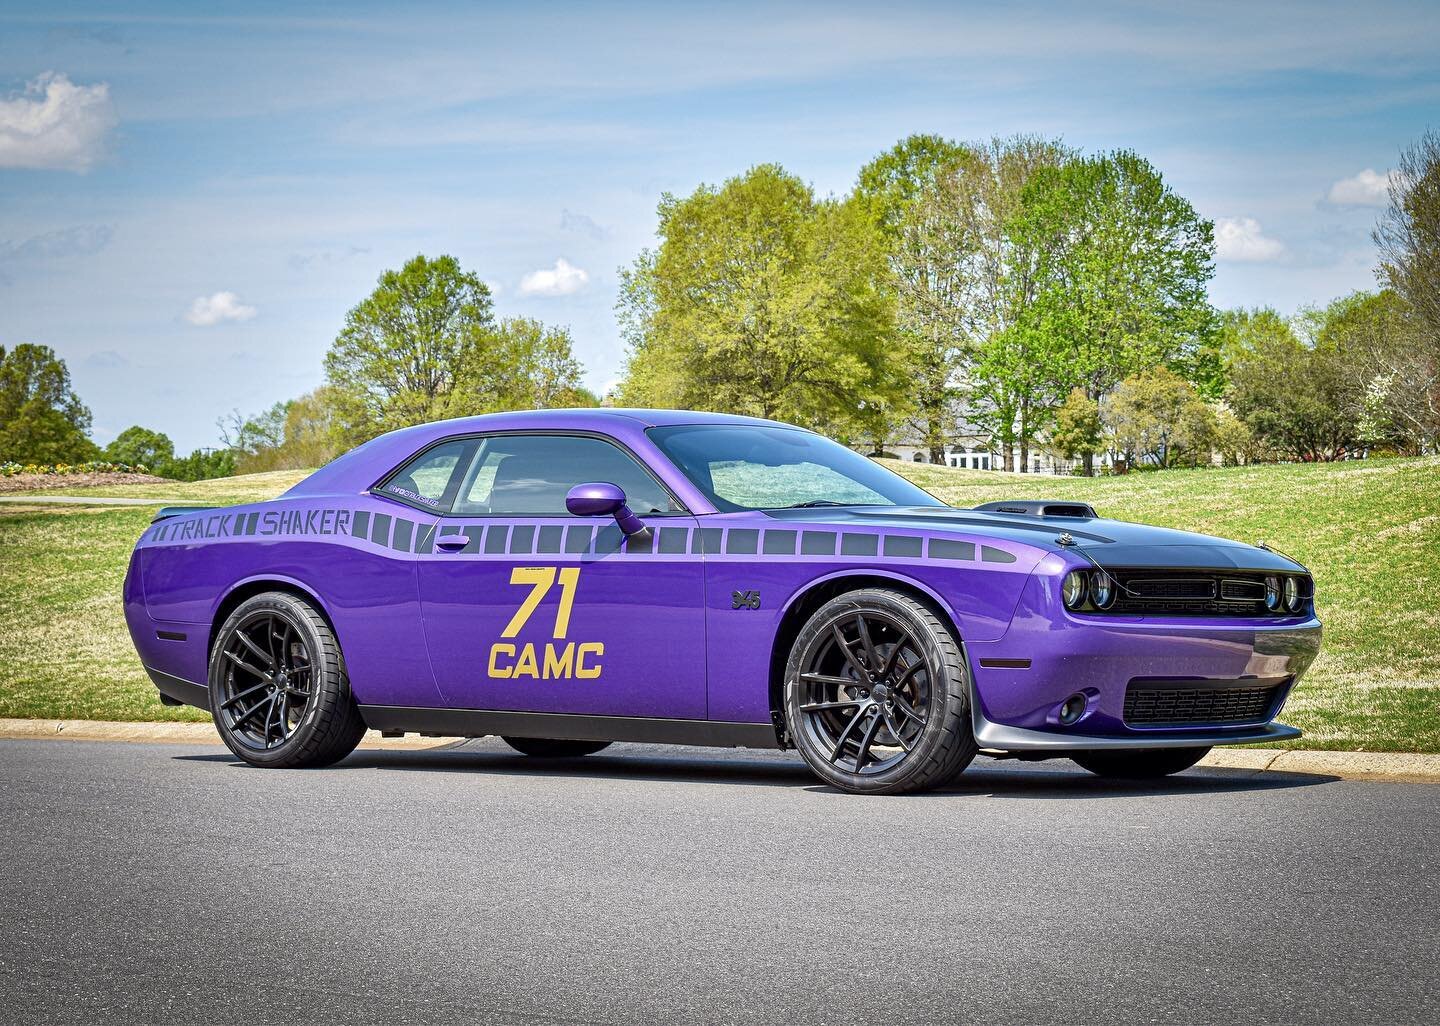 🛣Road and Track🏁
.
.
.
#trackshaker #rt #roadandtrack #challenger #musclecarsonly #musclecarzone #musclecarsdaily #musclecarpics #musclecarsusa #americanmusclecars #americanmusclecar #uscar #uscars #americancars #americancar #musclecarspictures #mu